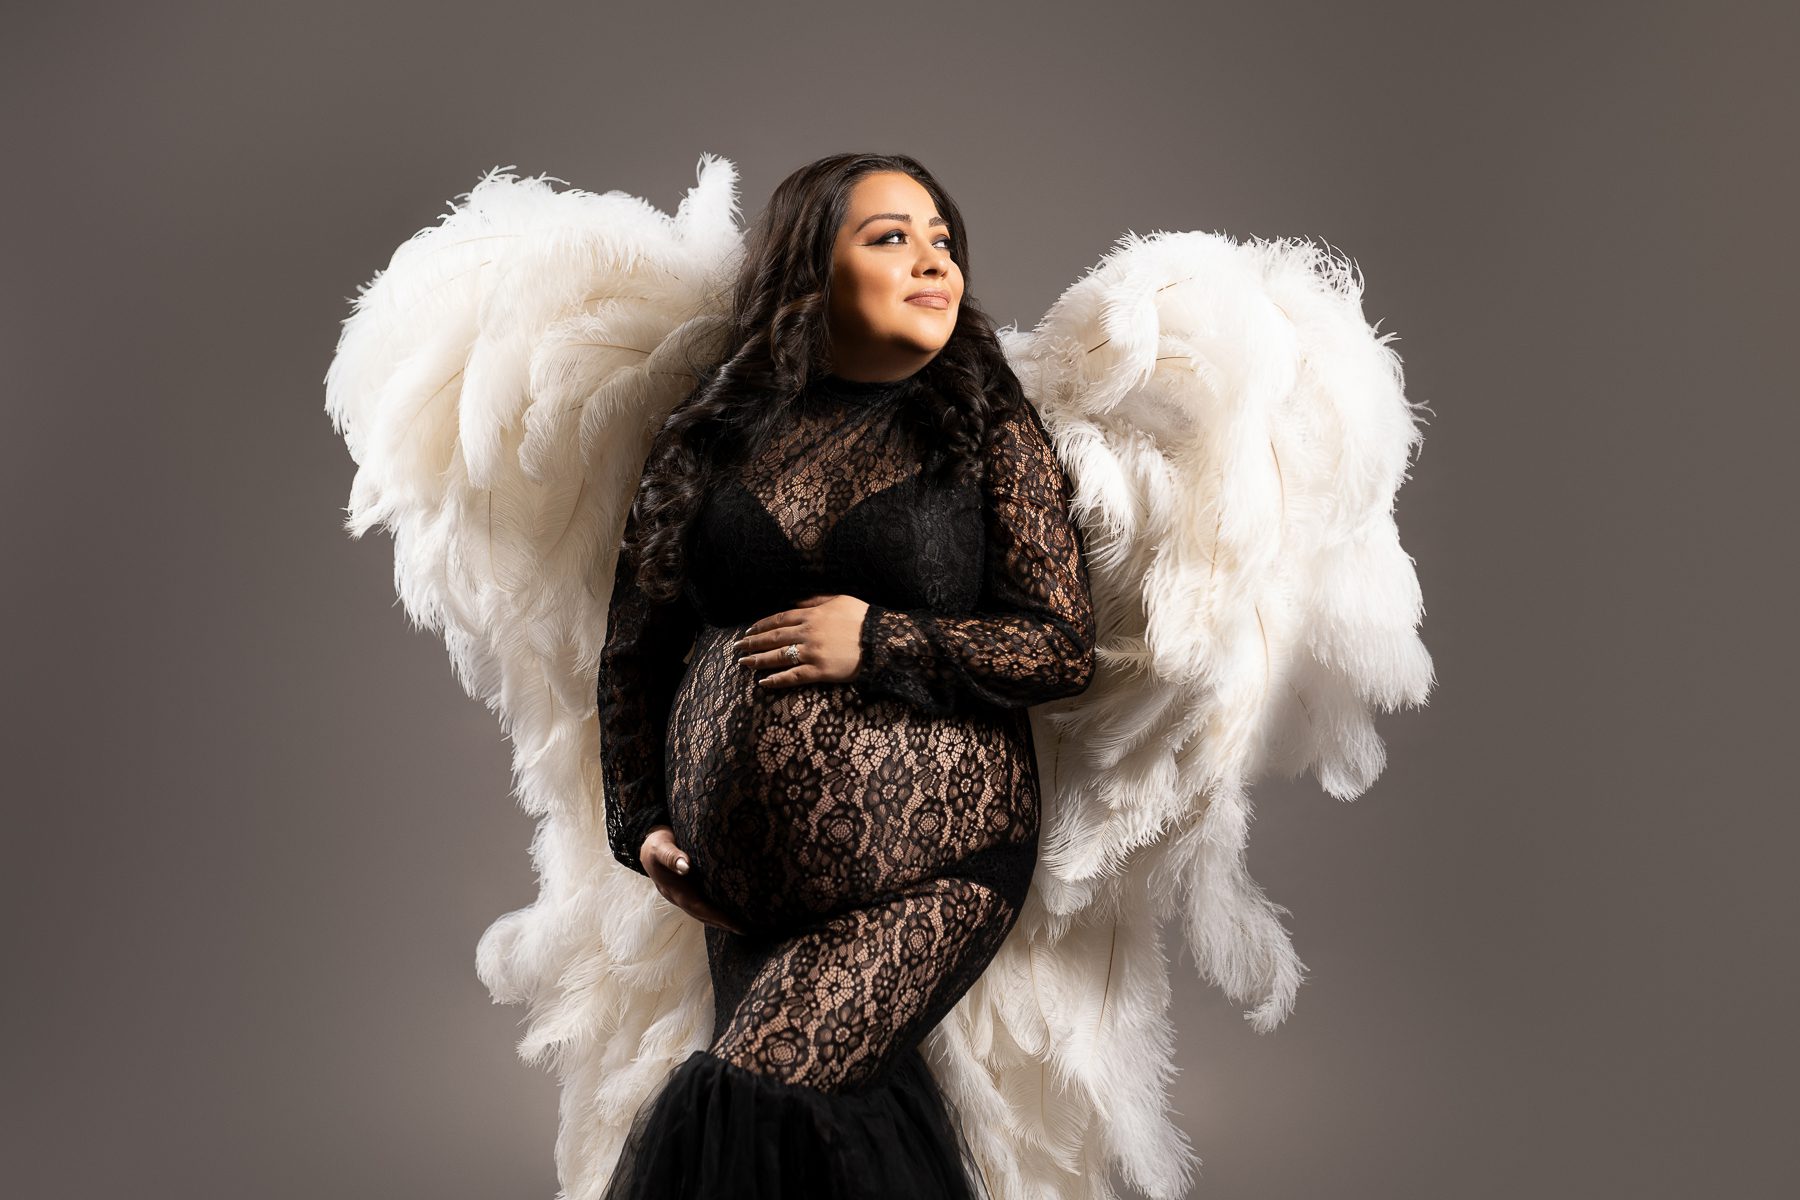 Maternity photo with angel wings